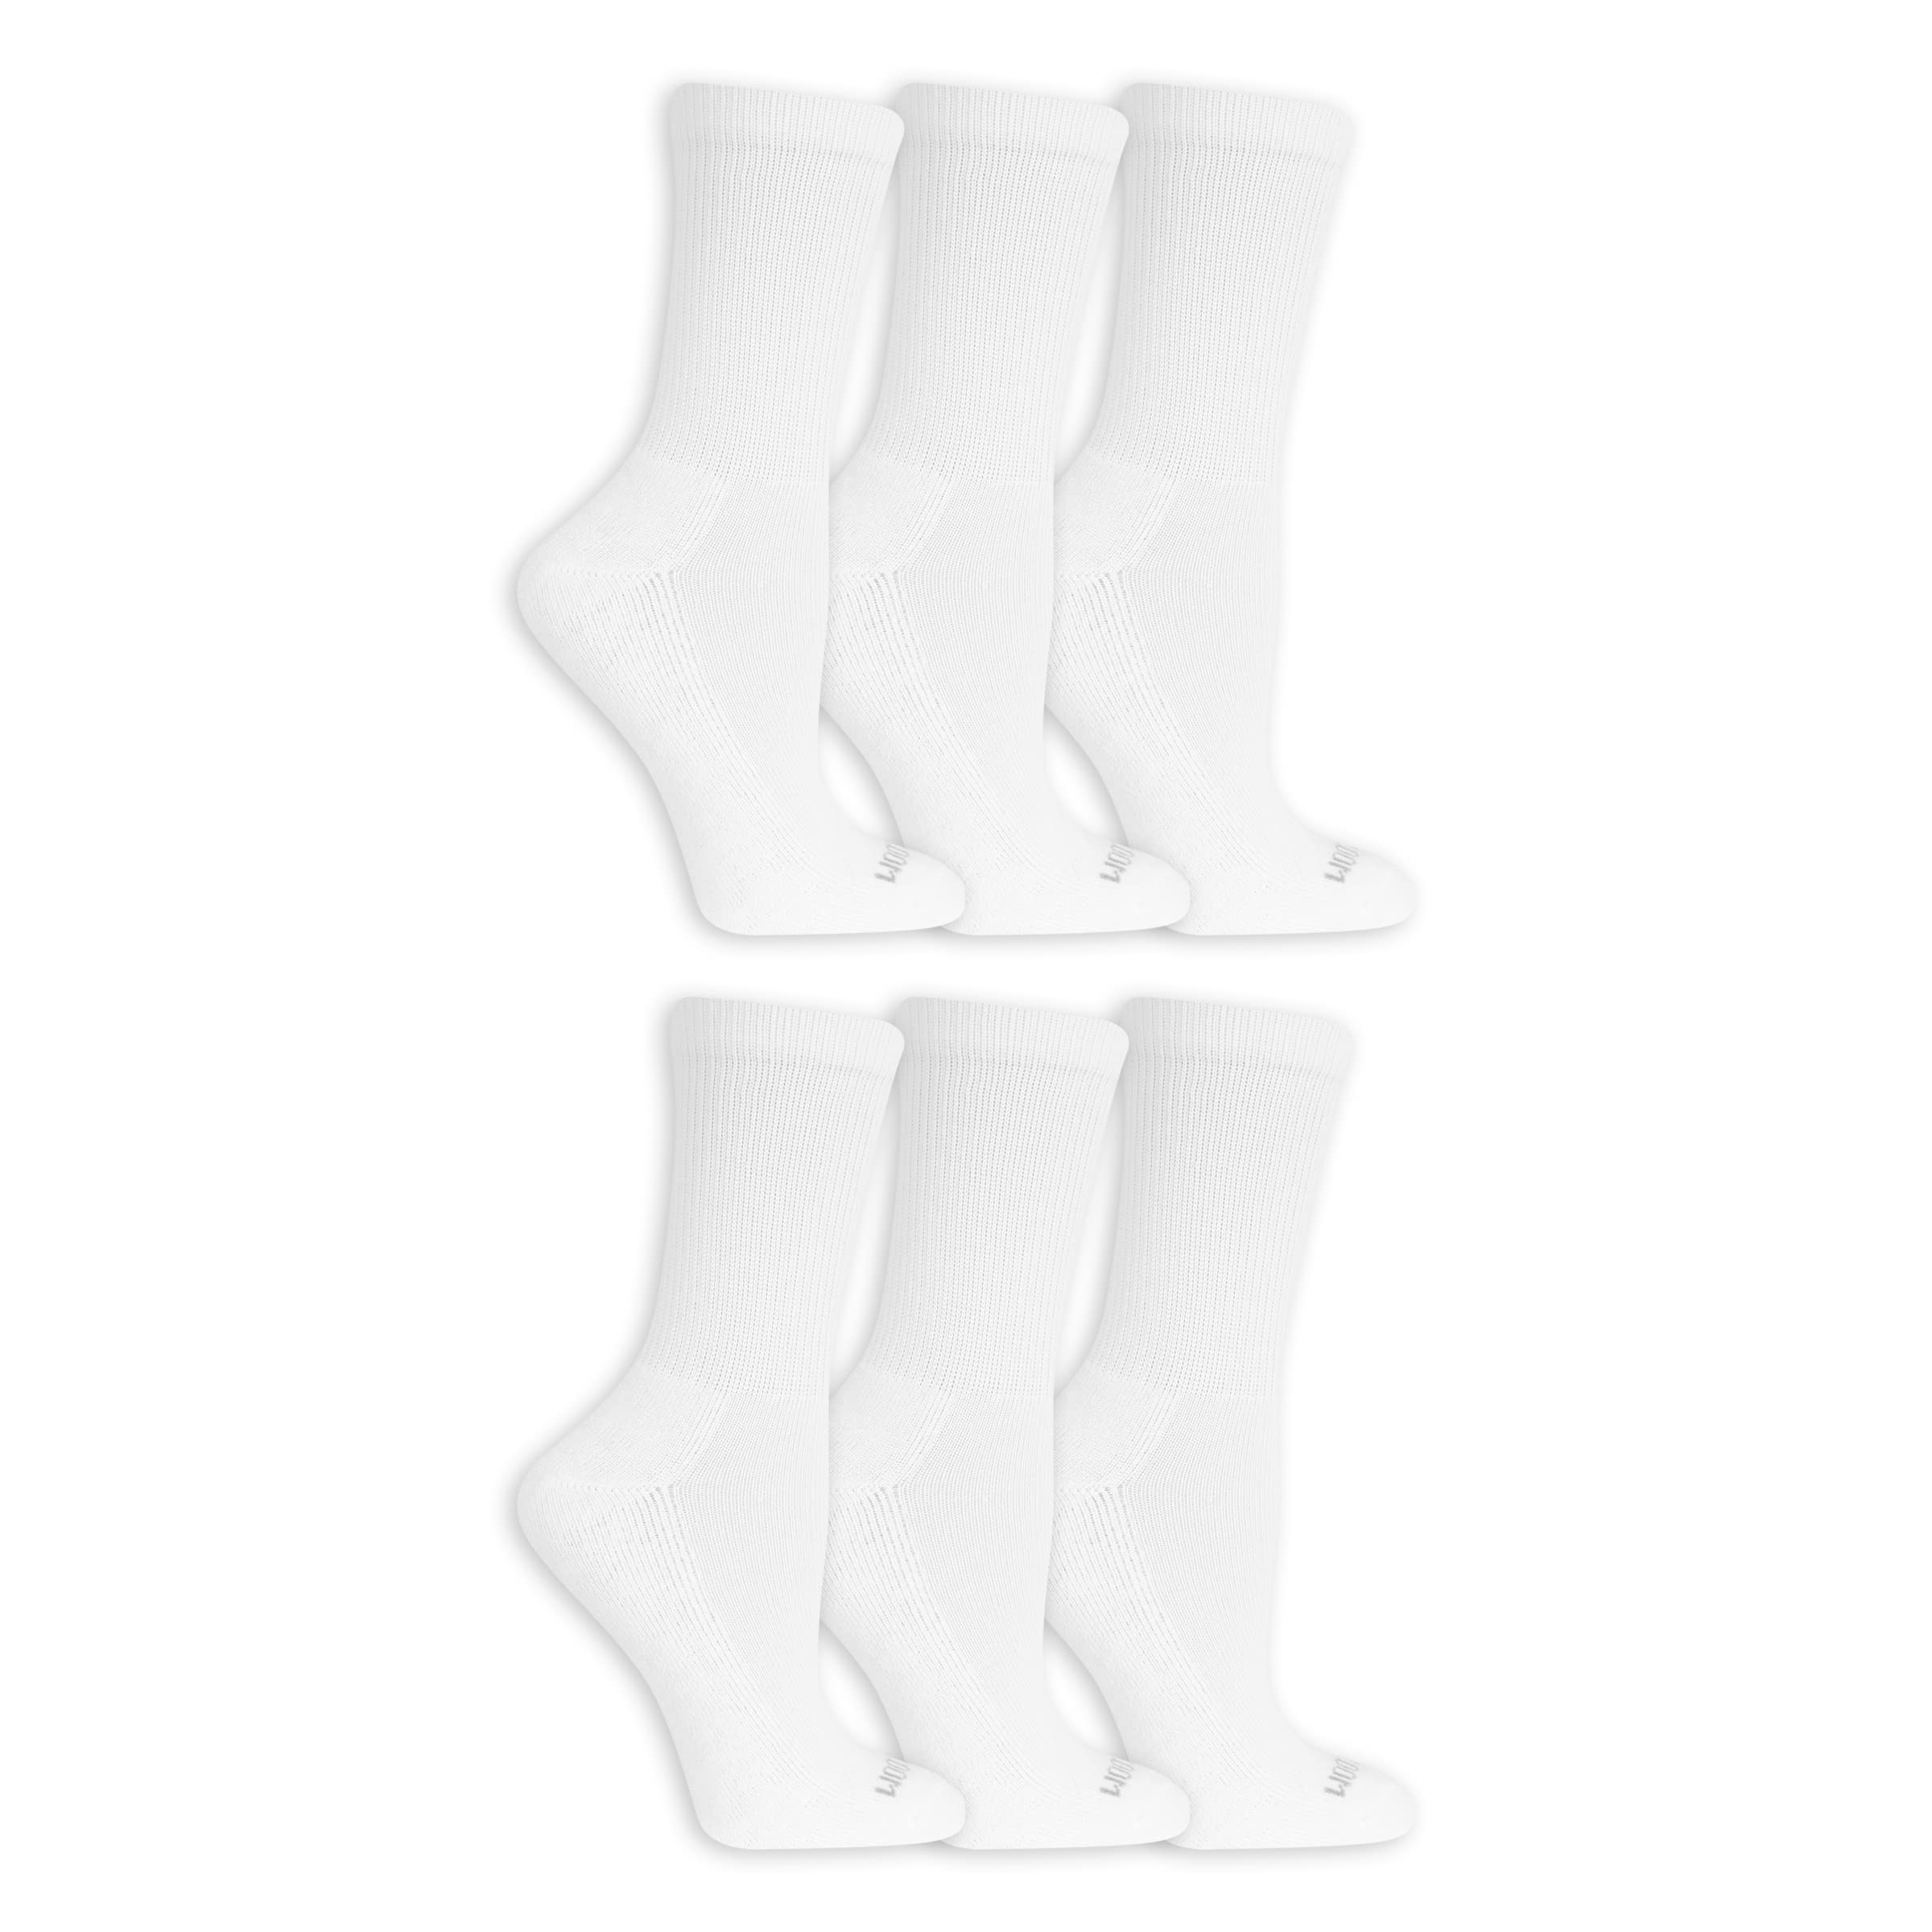 Fruit of the Loom Women's Everyday Soft Cushioned Socks-10 Pair Packs